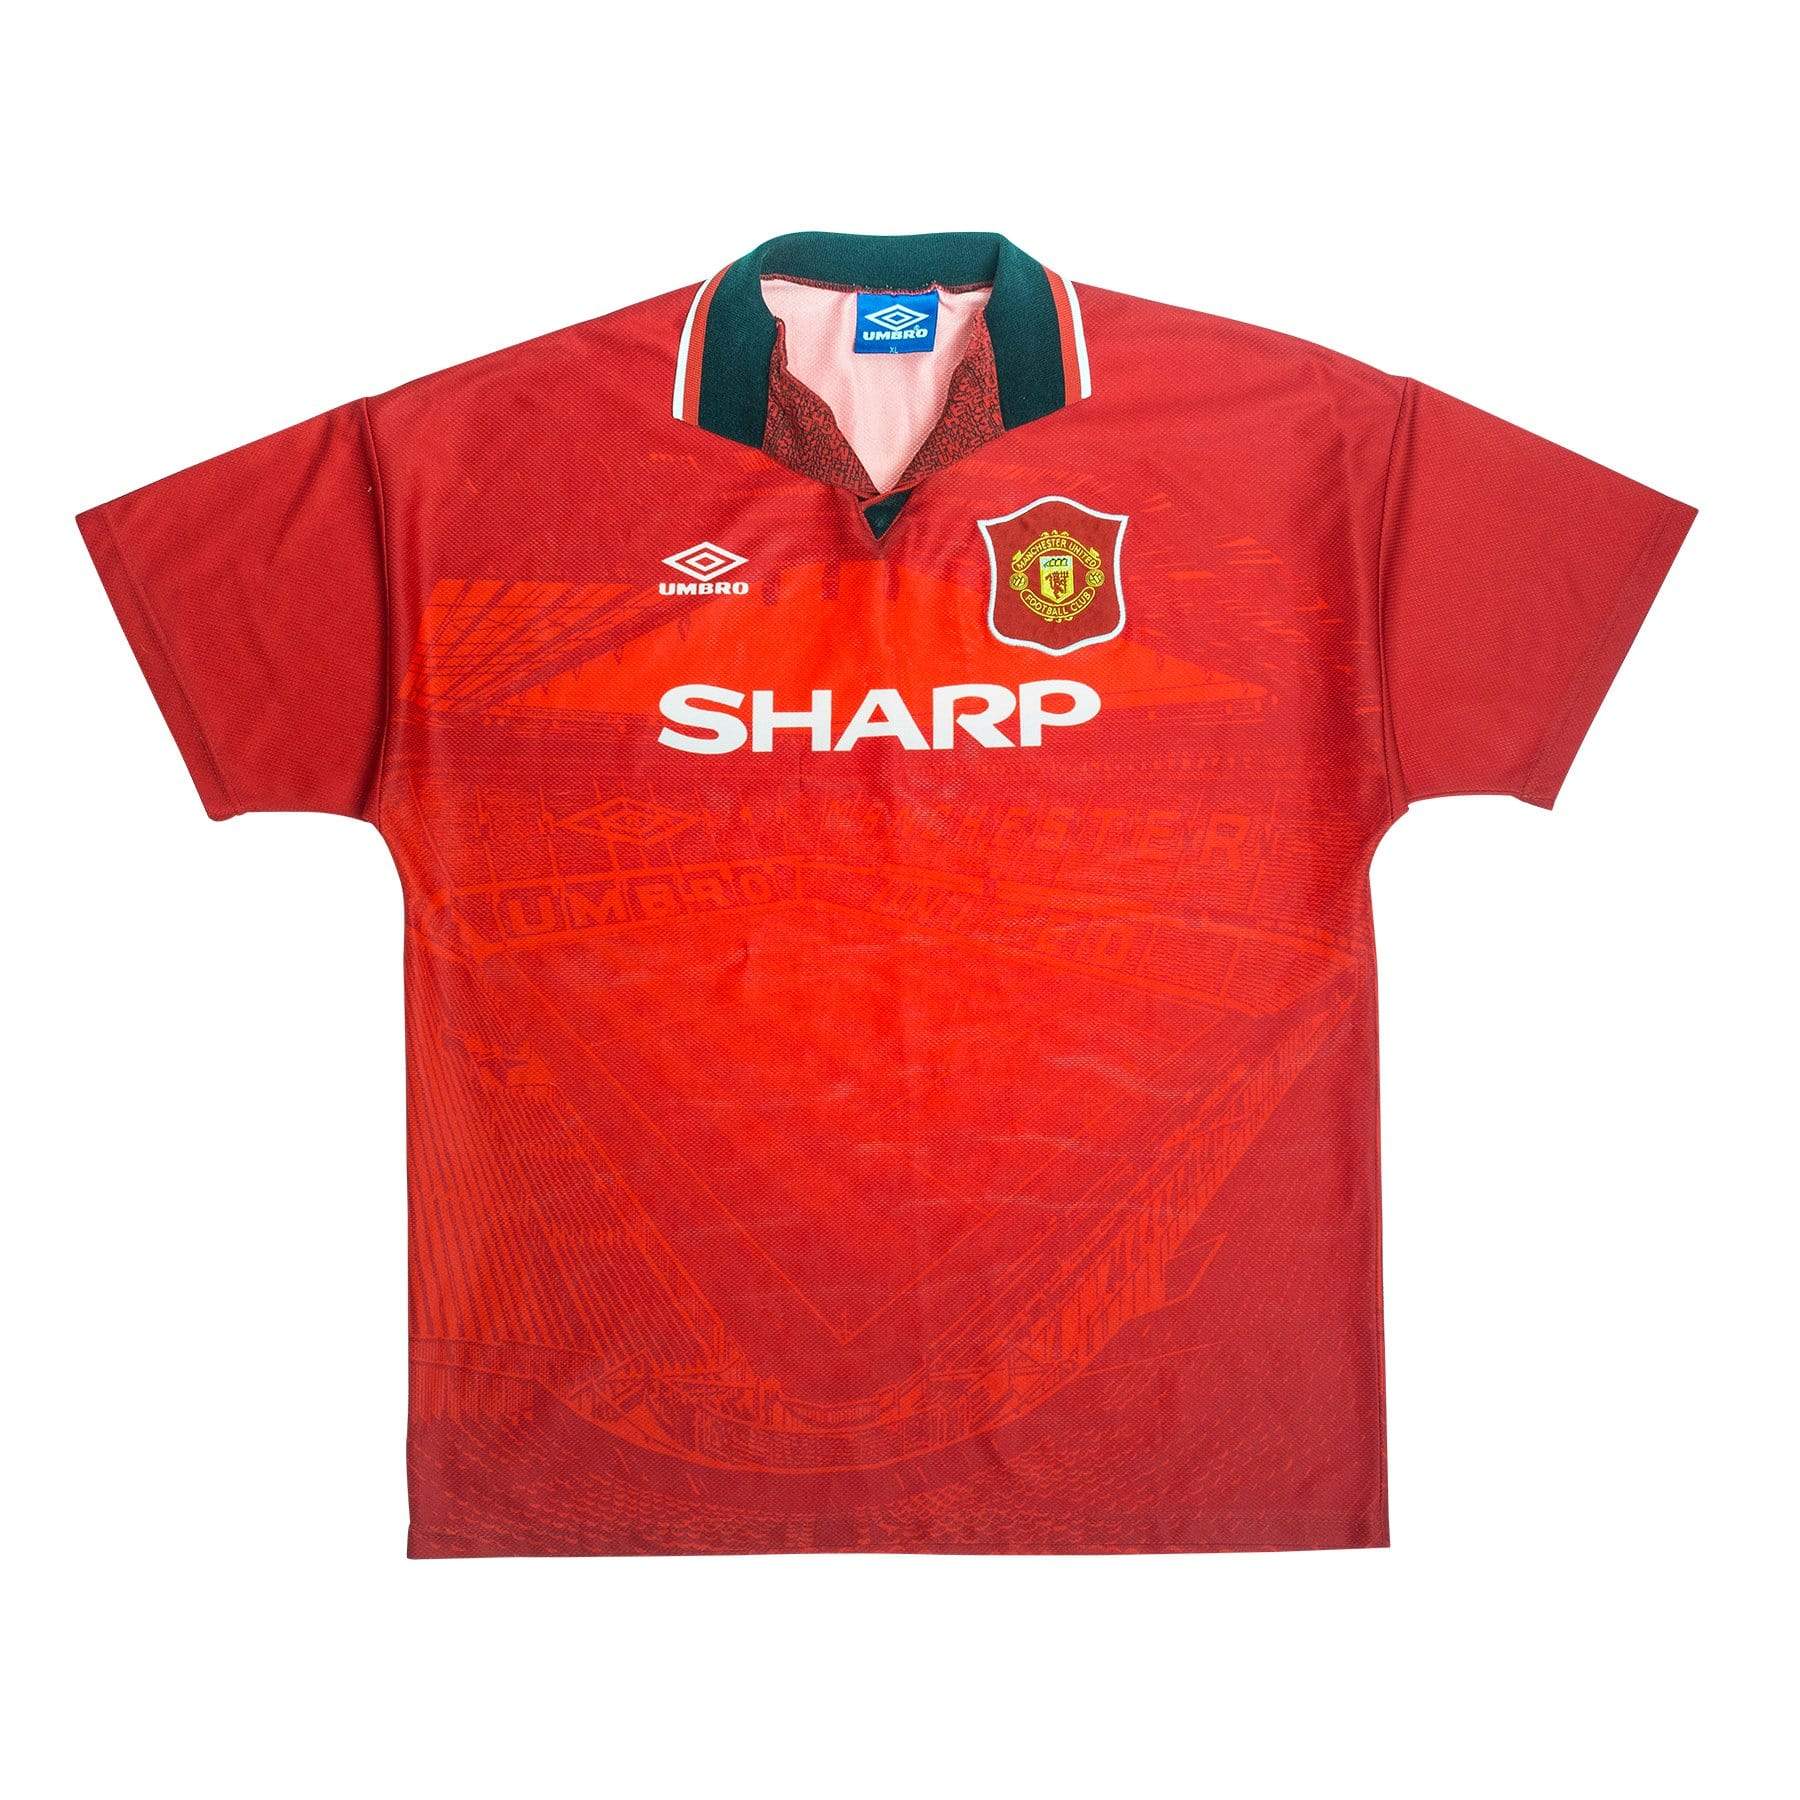 1994-95 Manchester United Home Shirt M Very Good - Football Shirt Collective